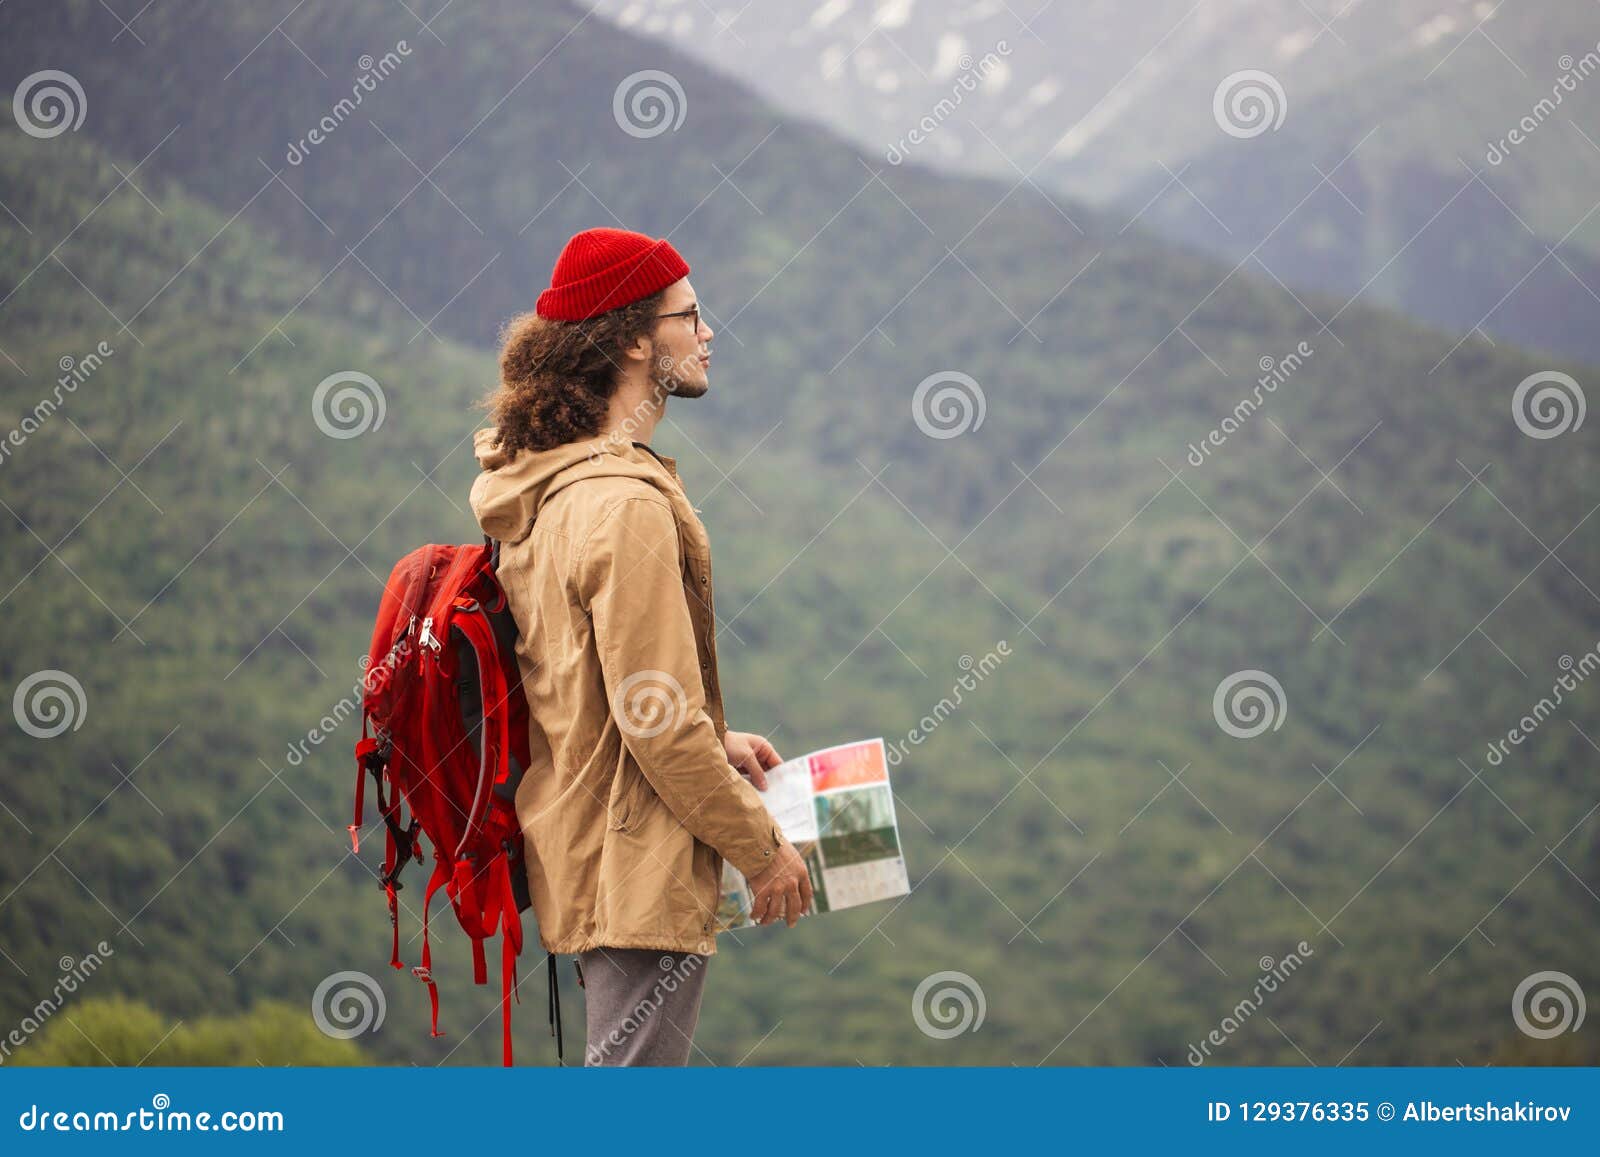 Man Traveler With Map And Red Backpack Searching Location Outdoor With Rocky Mountains On Background Stock Image Image Of Nature Landscape